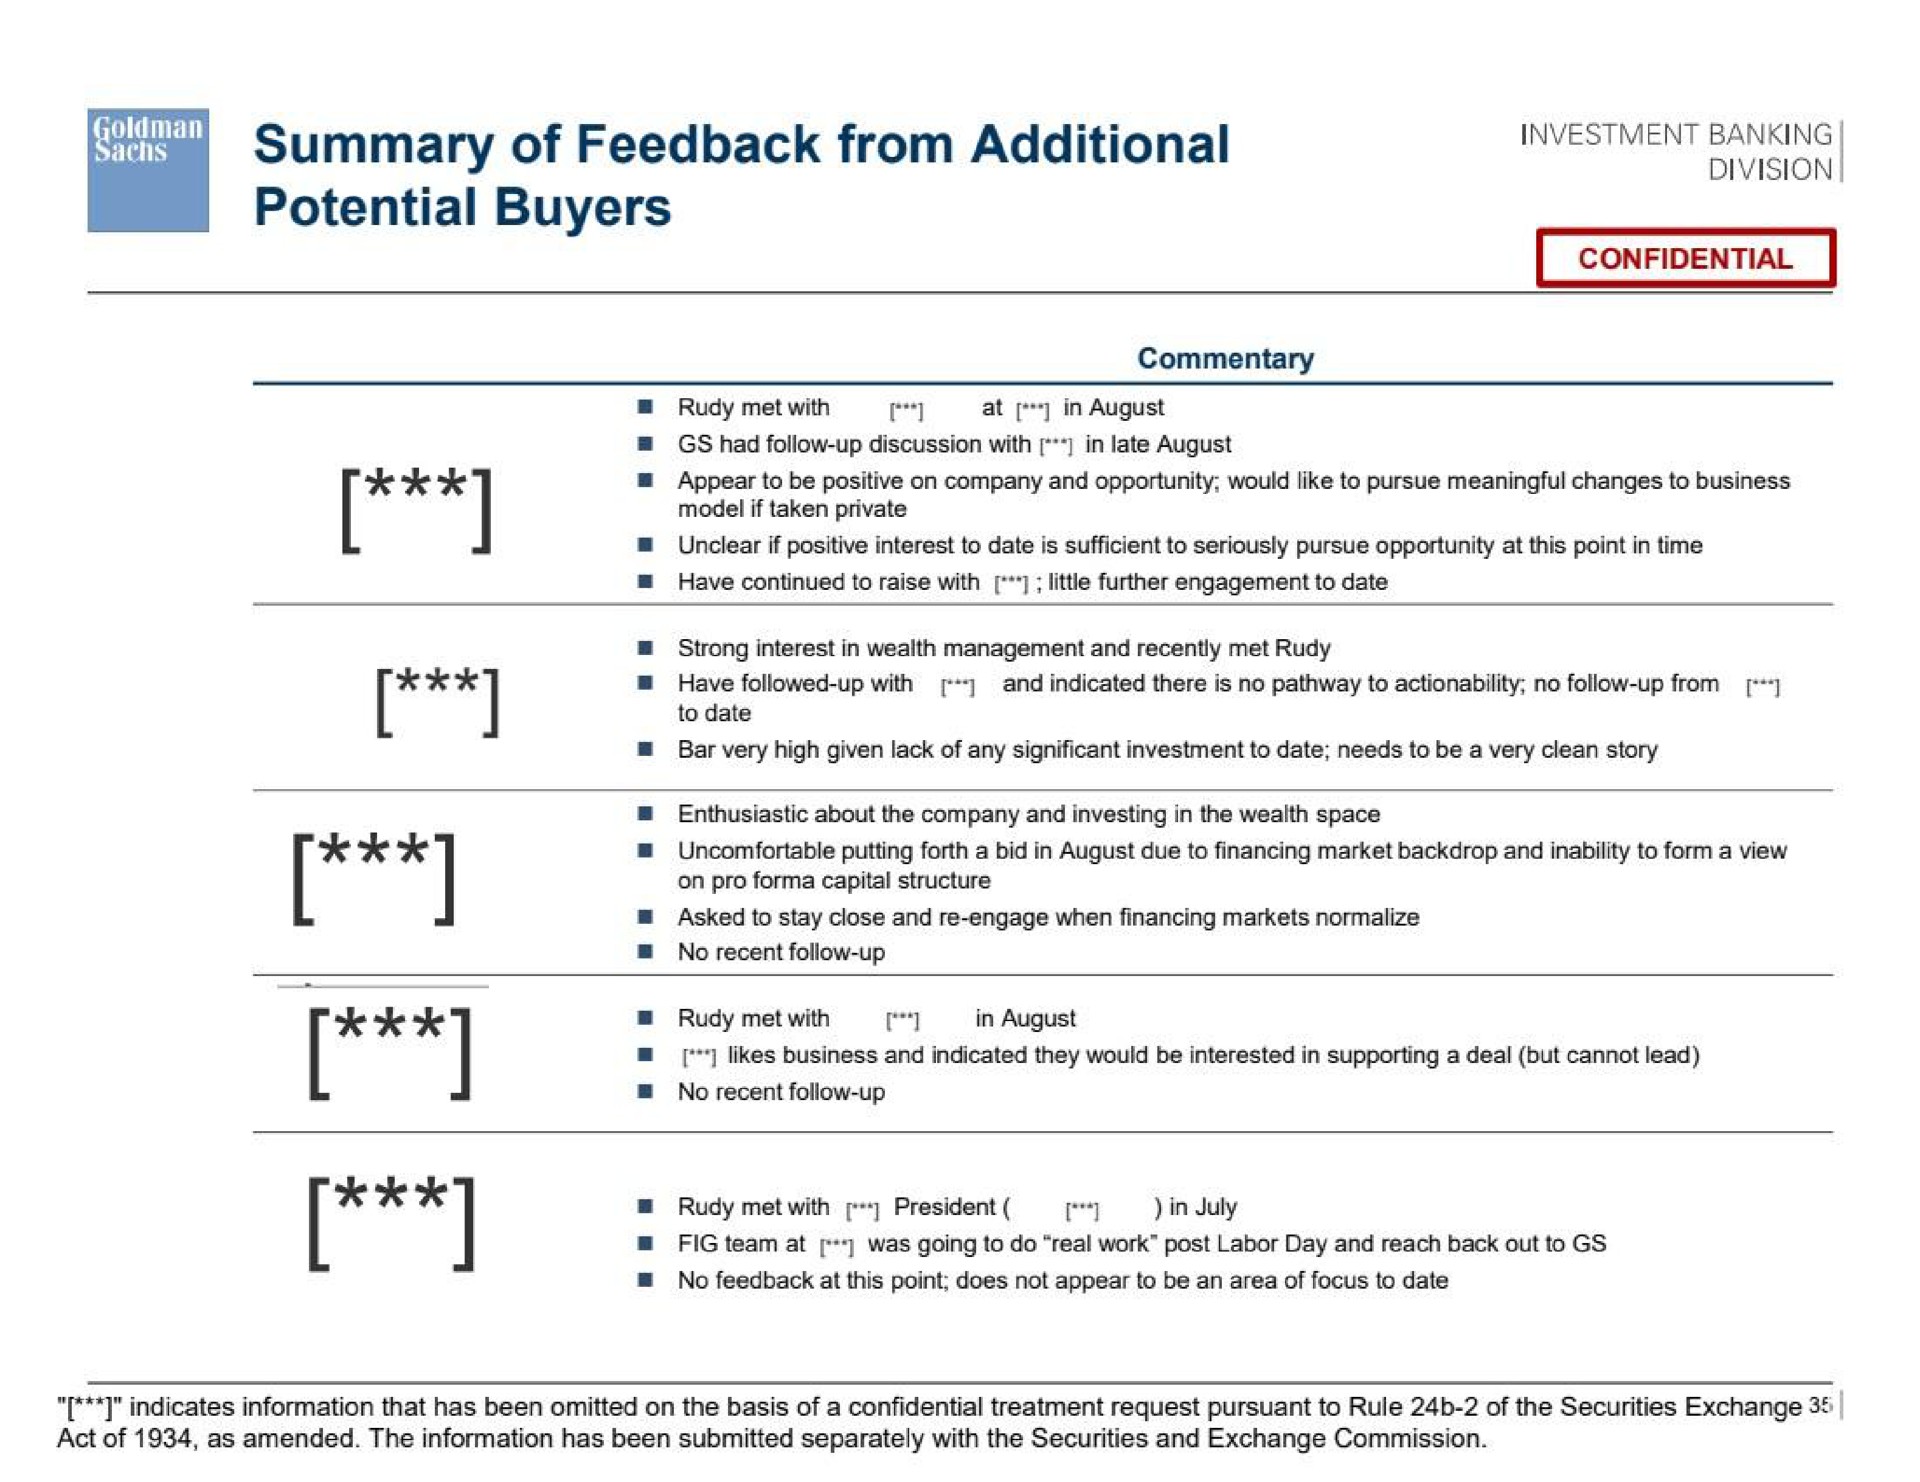 summary of feedback from additional potential buyers investment gen | Goldman Sachs